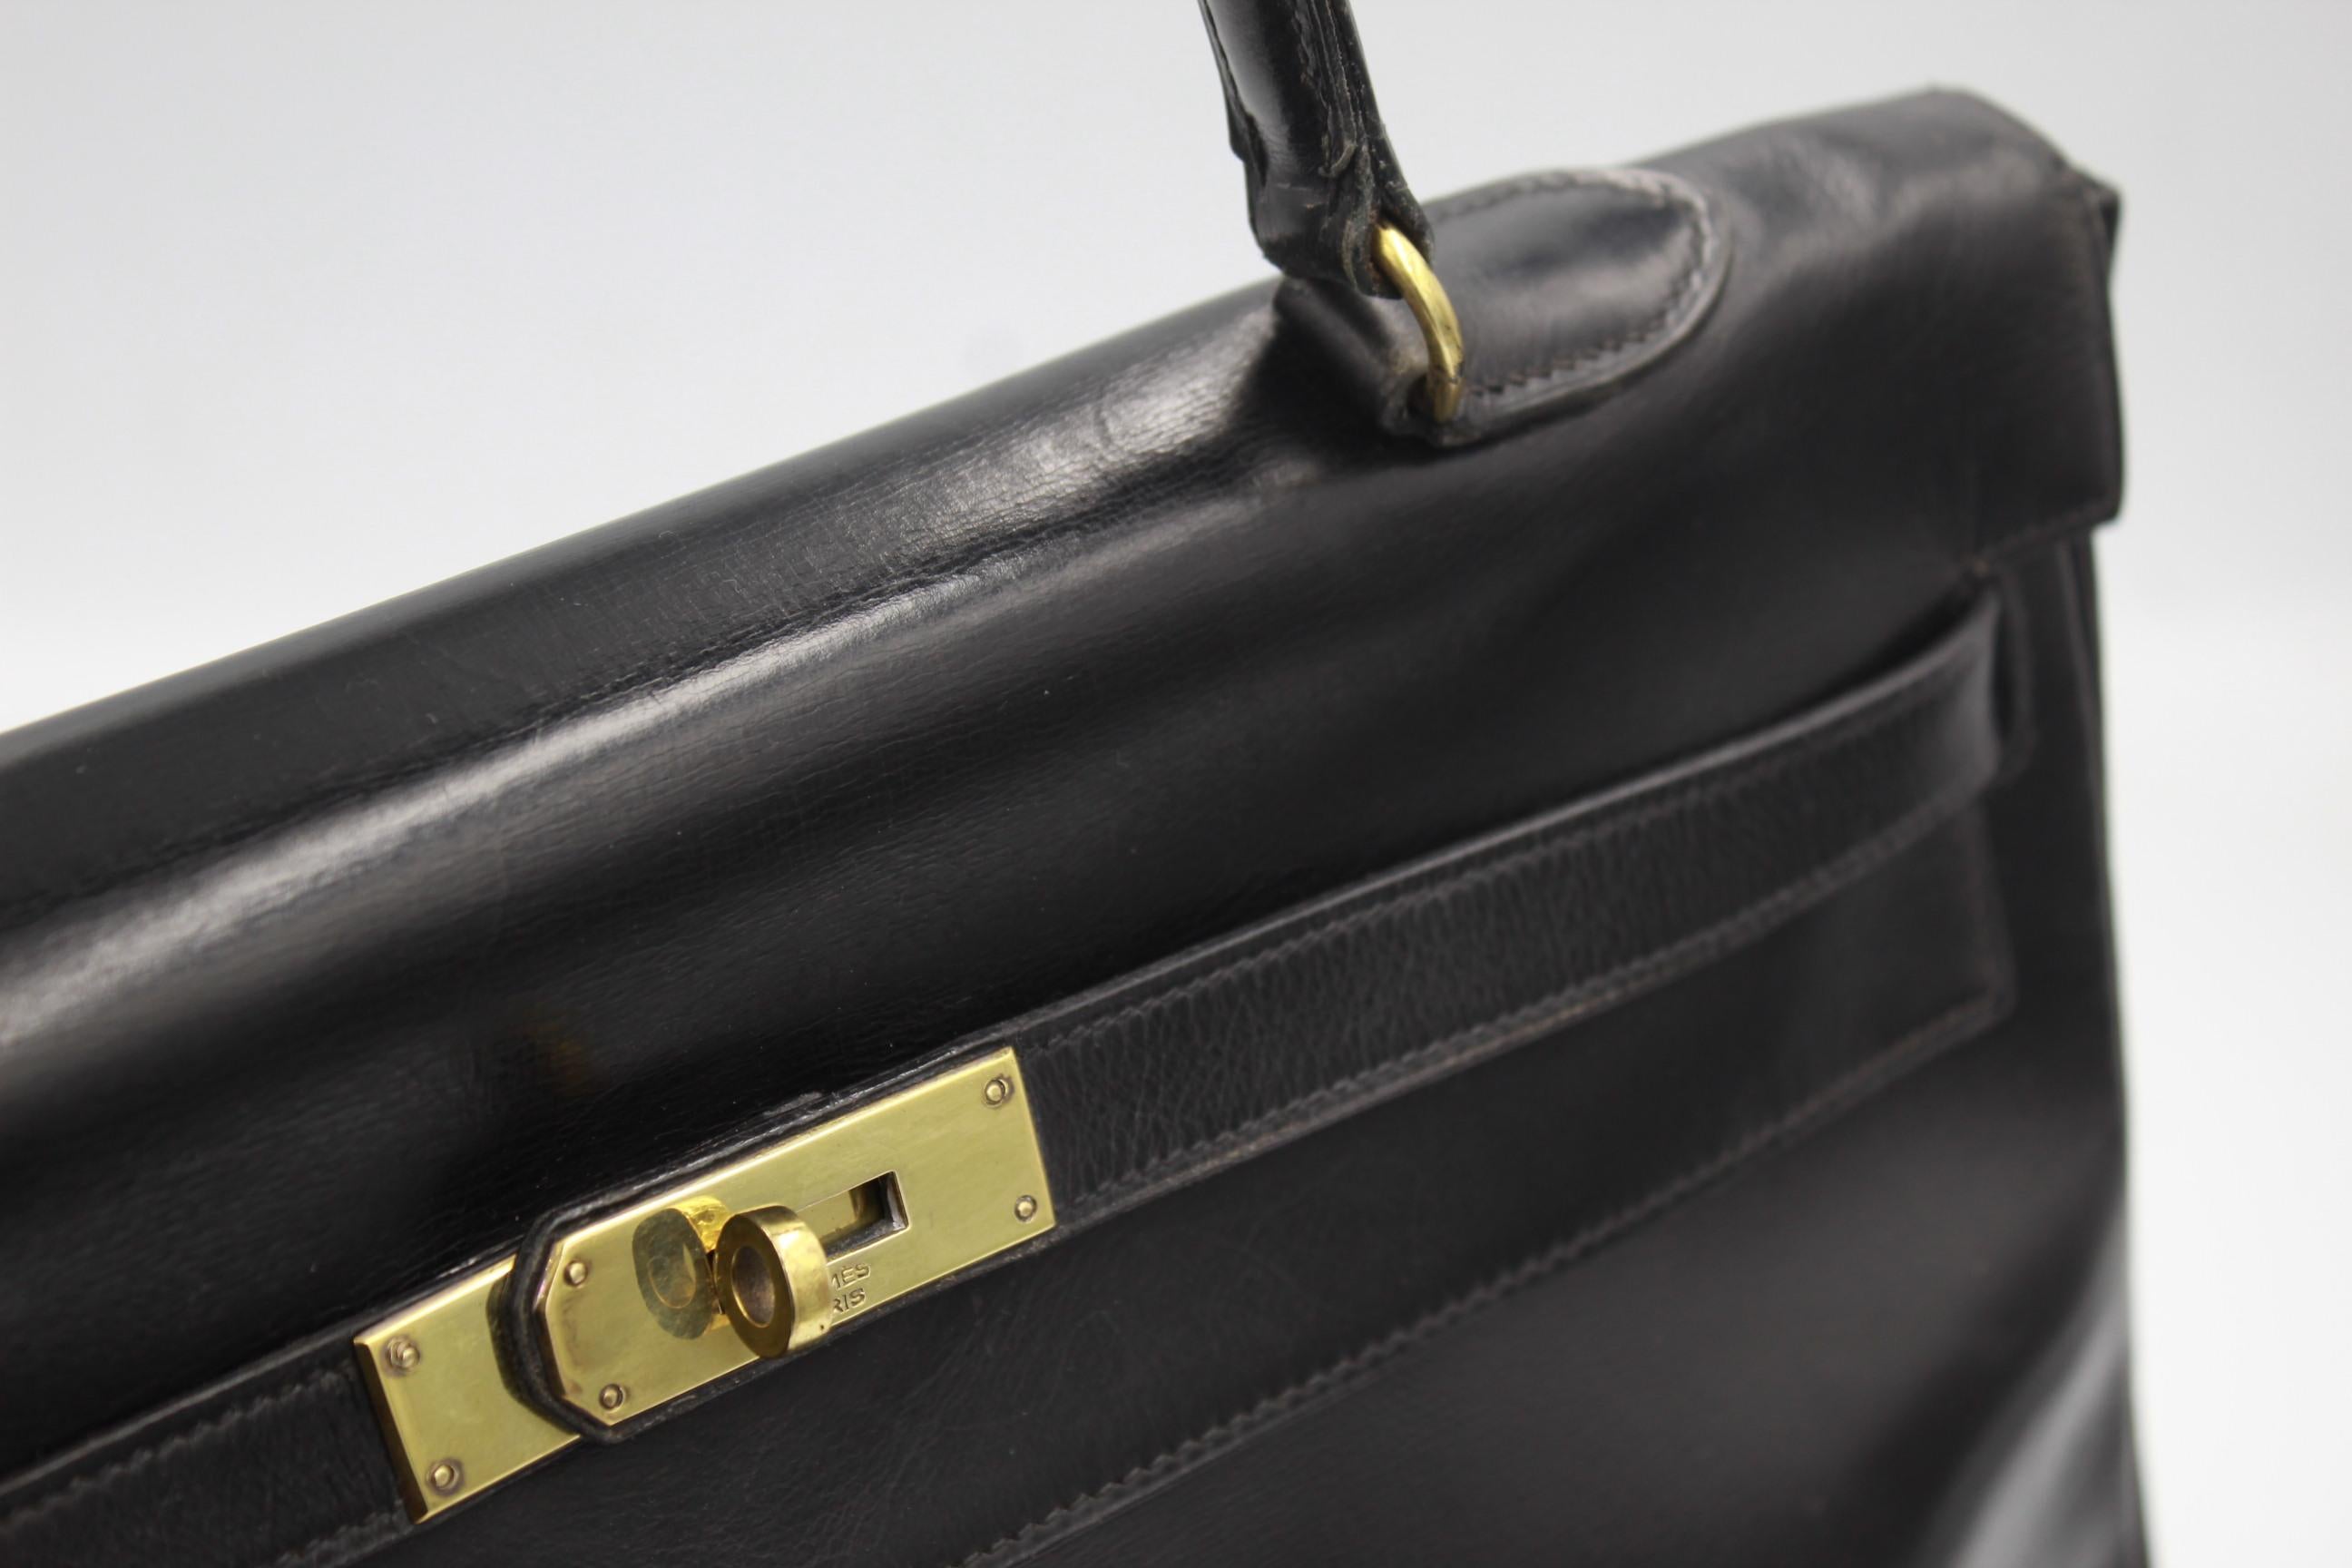 Vintage Hermes 35 bag in bblack  box leather.

Condition: fair vintage condition for an item from the 60's. Light cracking on the leather 

Signs of use in the handle (check images)

Sold without lock or clochette

Size 35x25 centimeters.